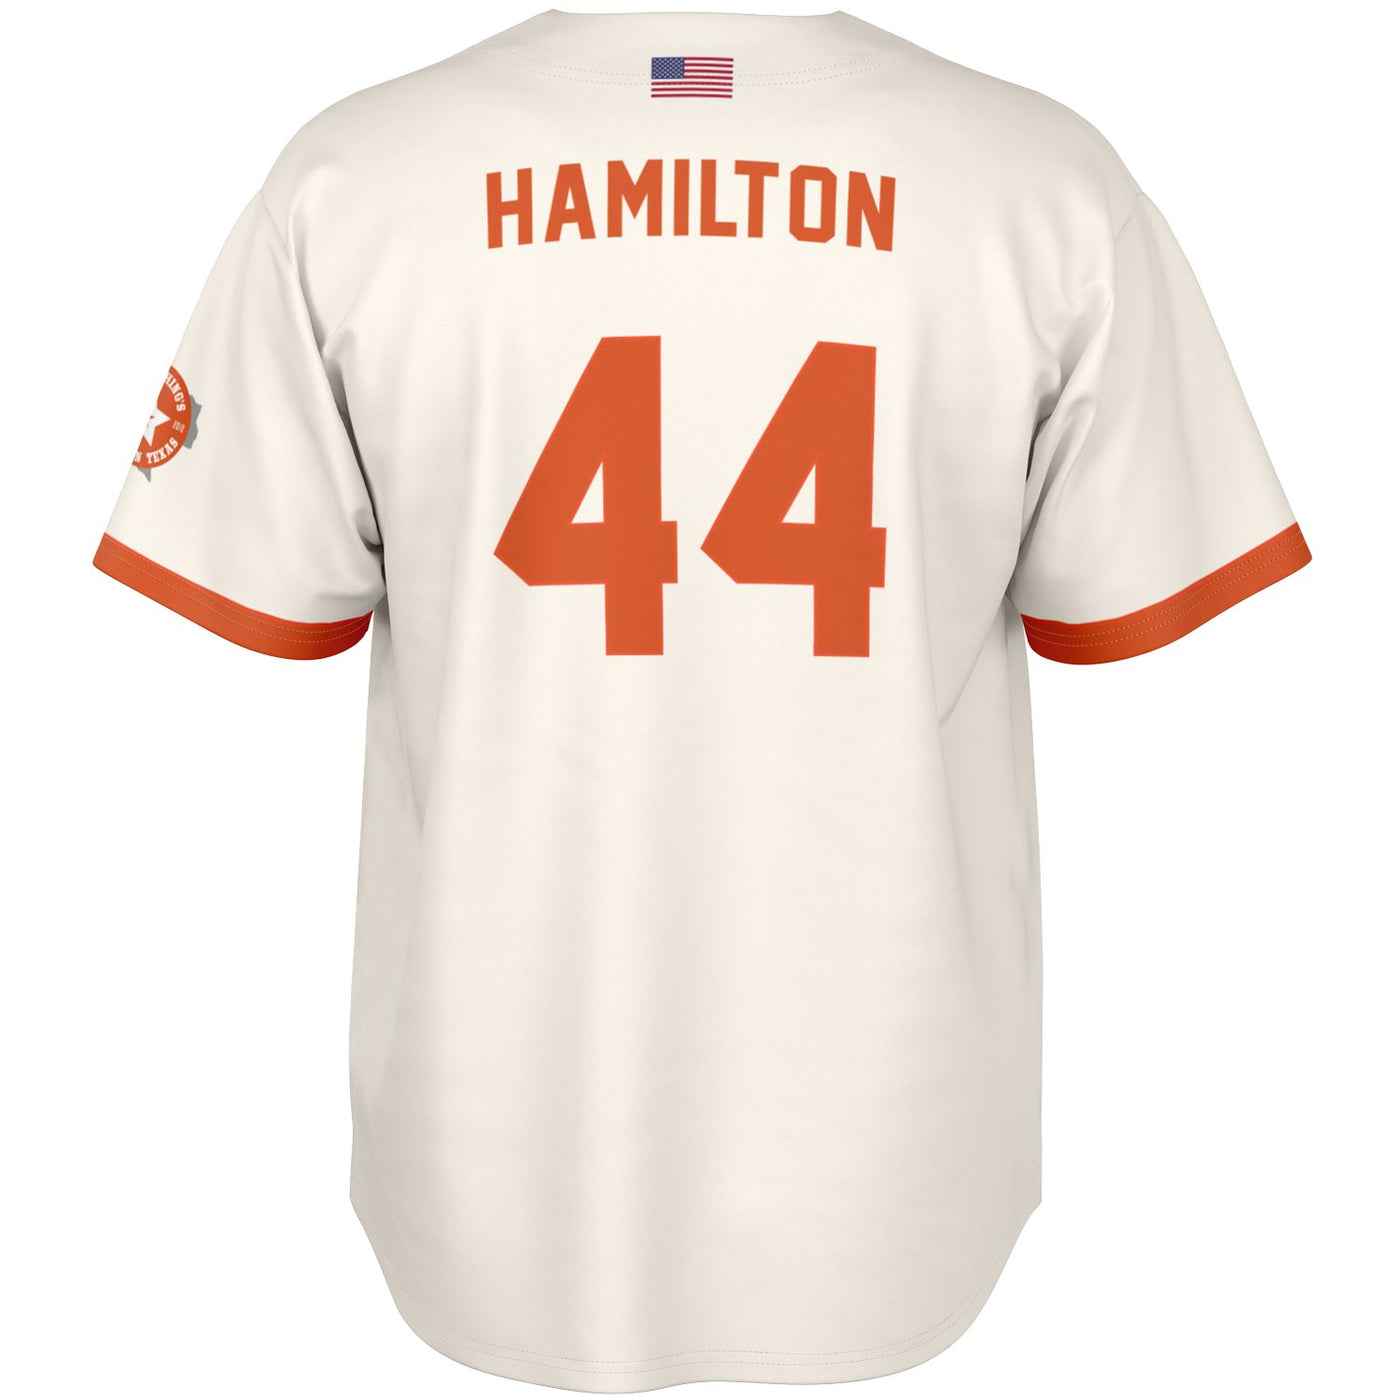 Hamilton - Off-White Texas GP Jersey (Clearance) - Furious Motorsport